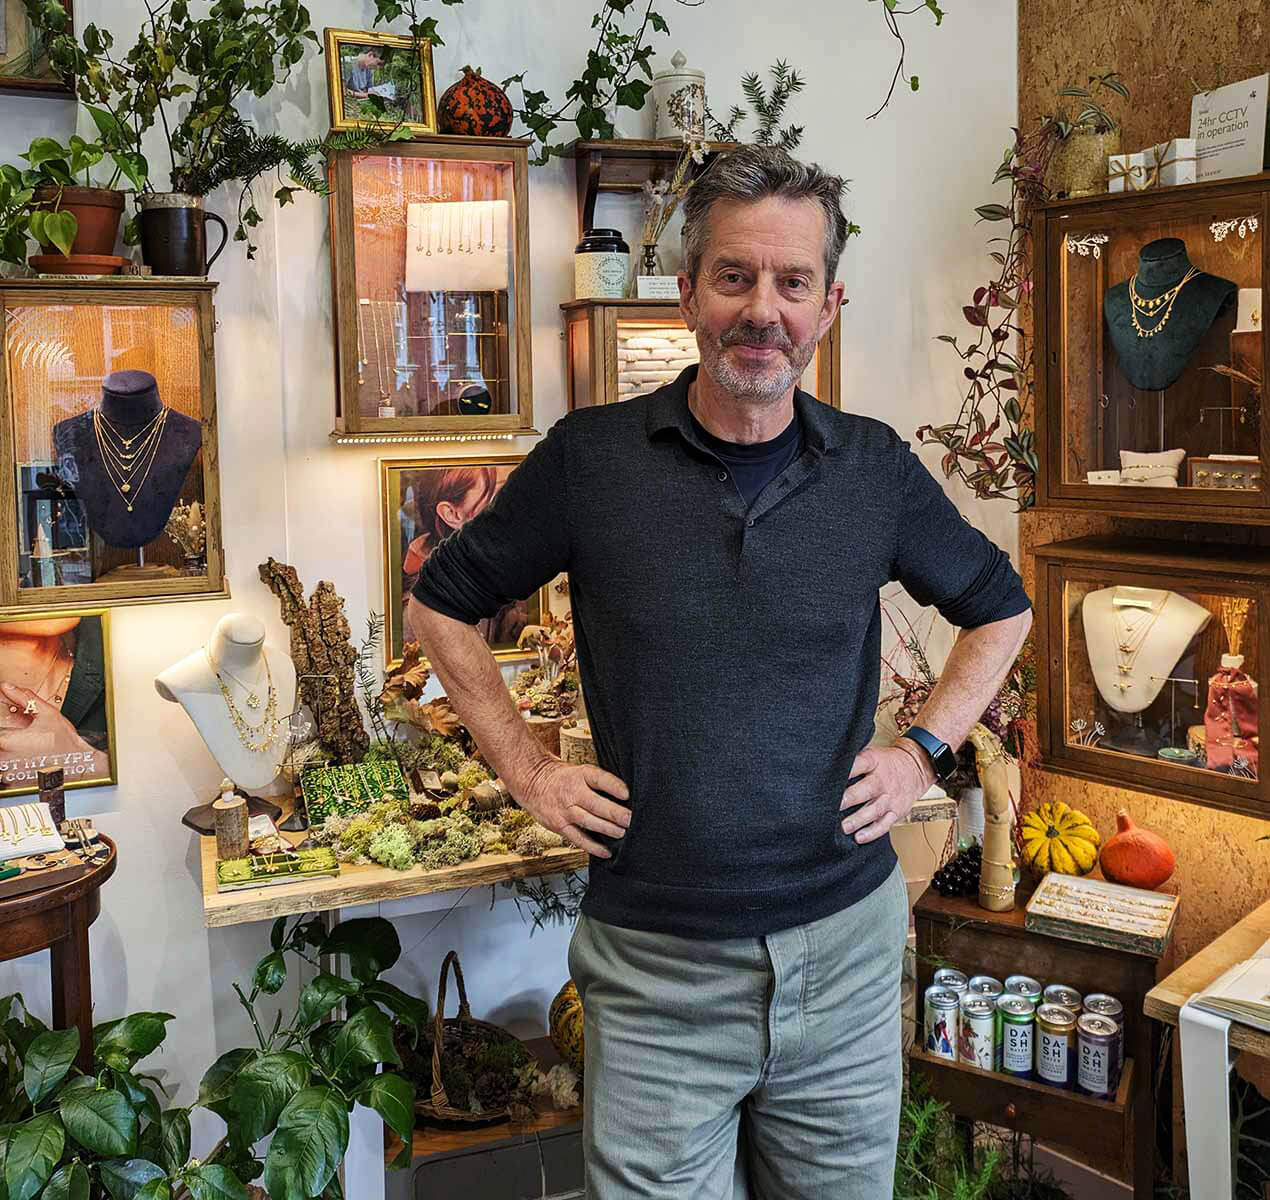 Alex Monroe is stood with his hands on his hips and smiling with jewellery display cabinets and indoor plants around him.